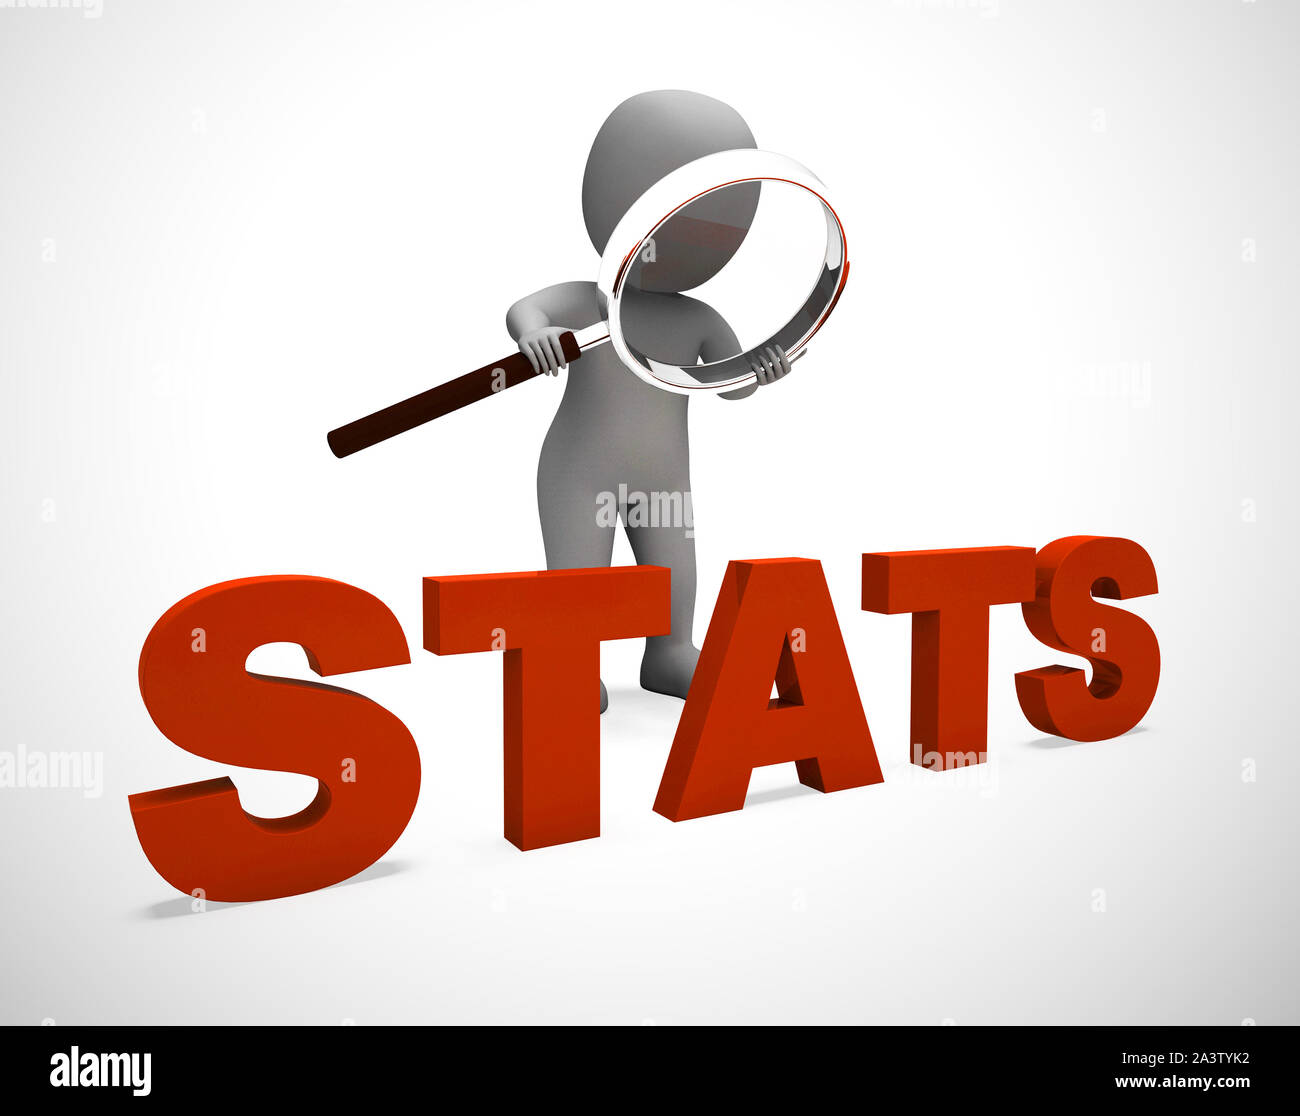 Stats concept icon mean statistics and numeric figures. A census computation or business intelligence - 3d illustration Stock Photo